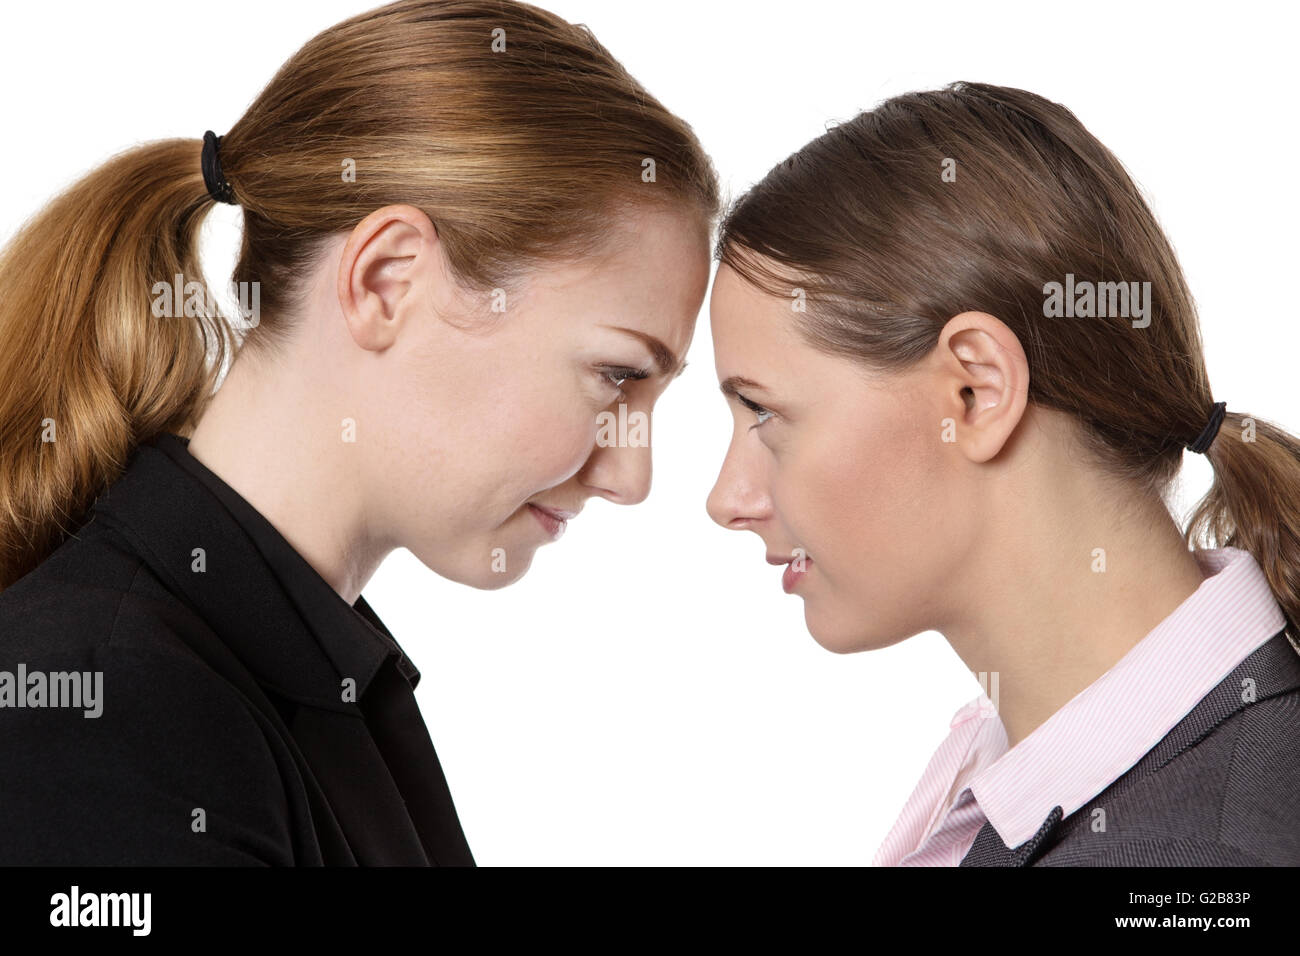 Close up office shot of two businesswomen knocking their heads together.  isolated on white Stock Photo